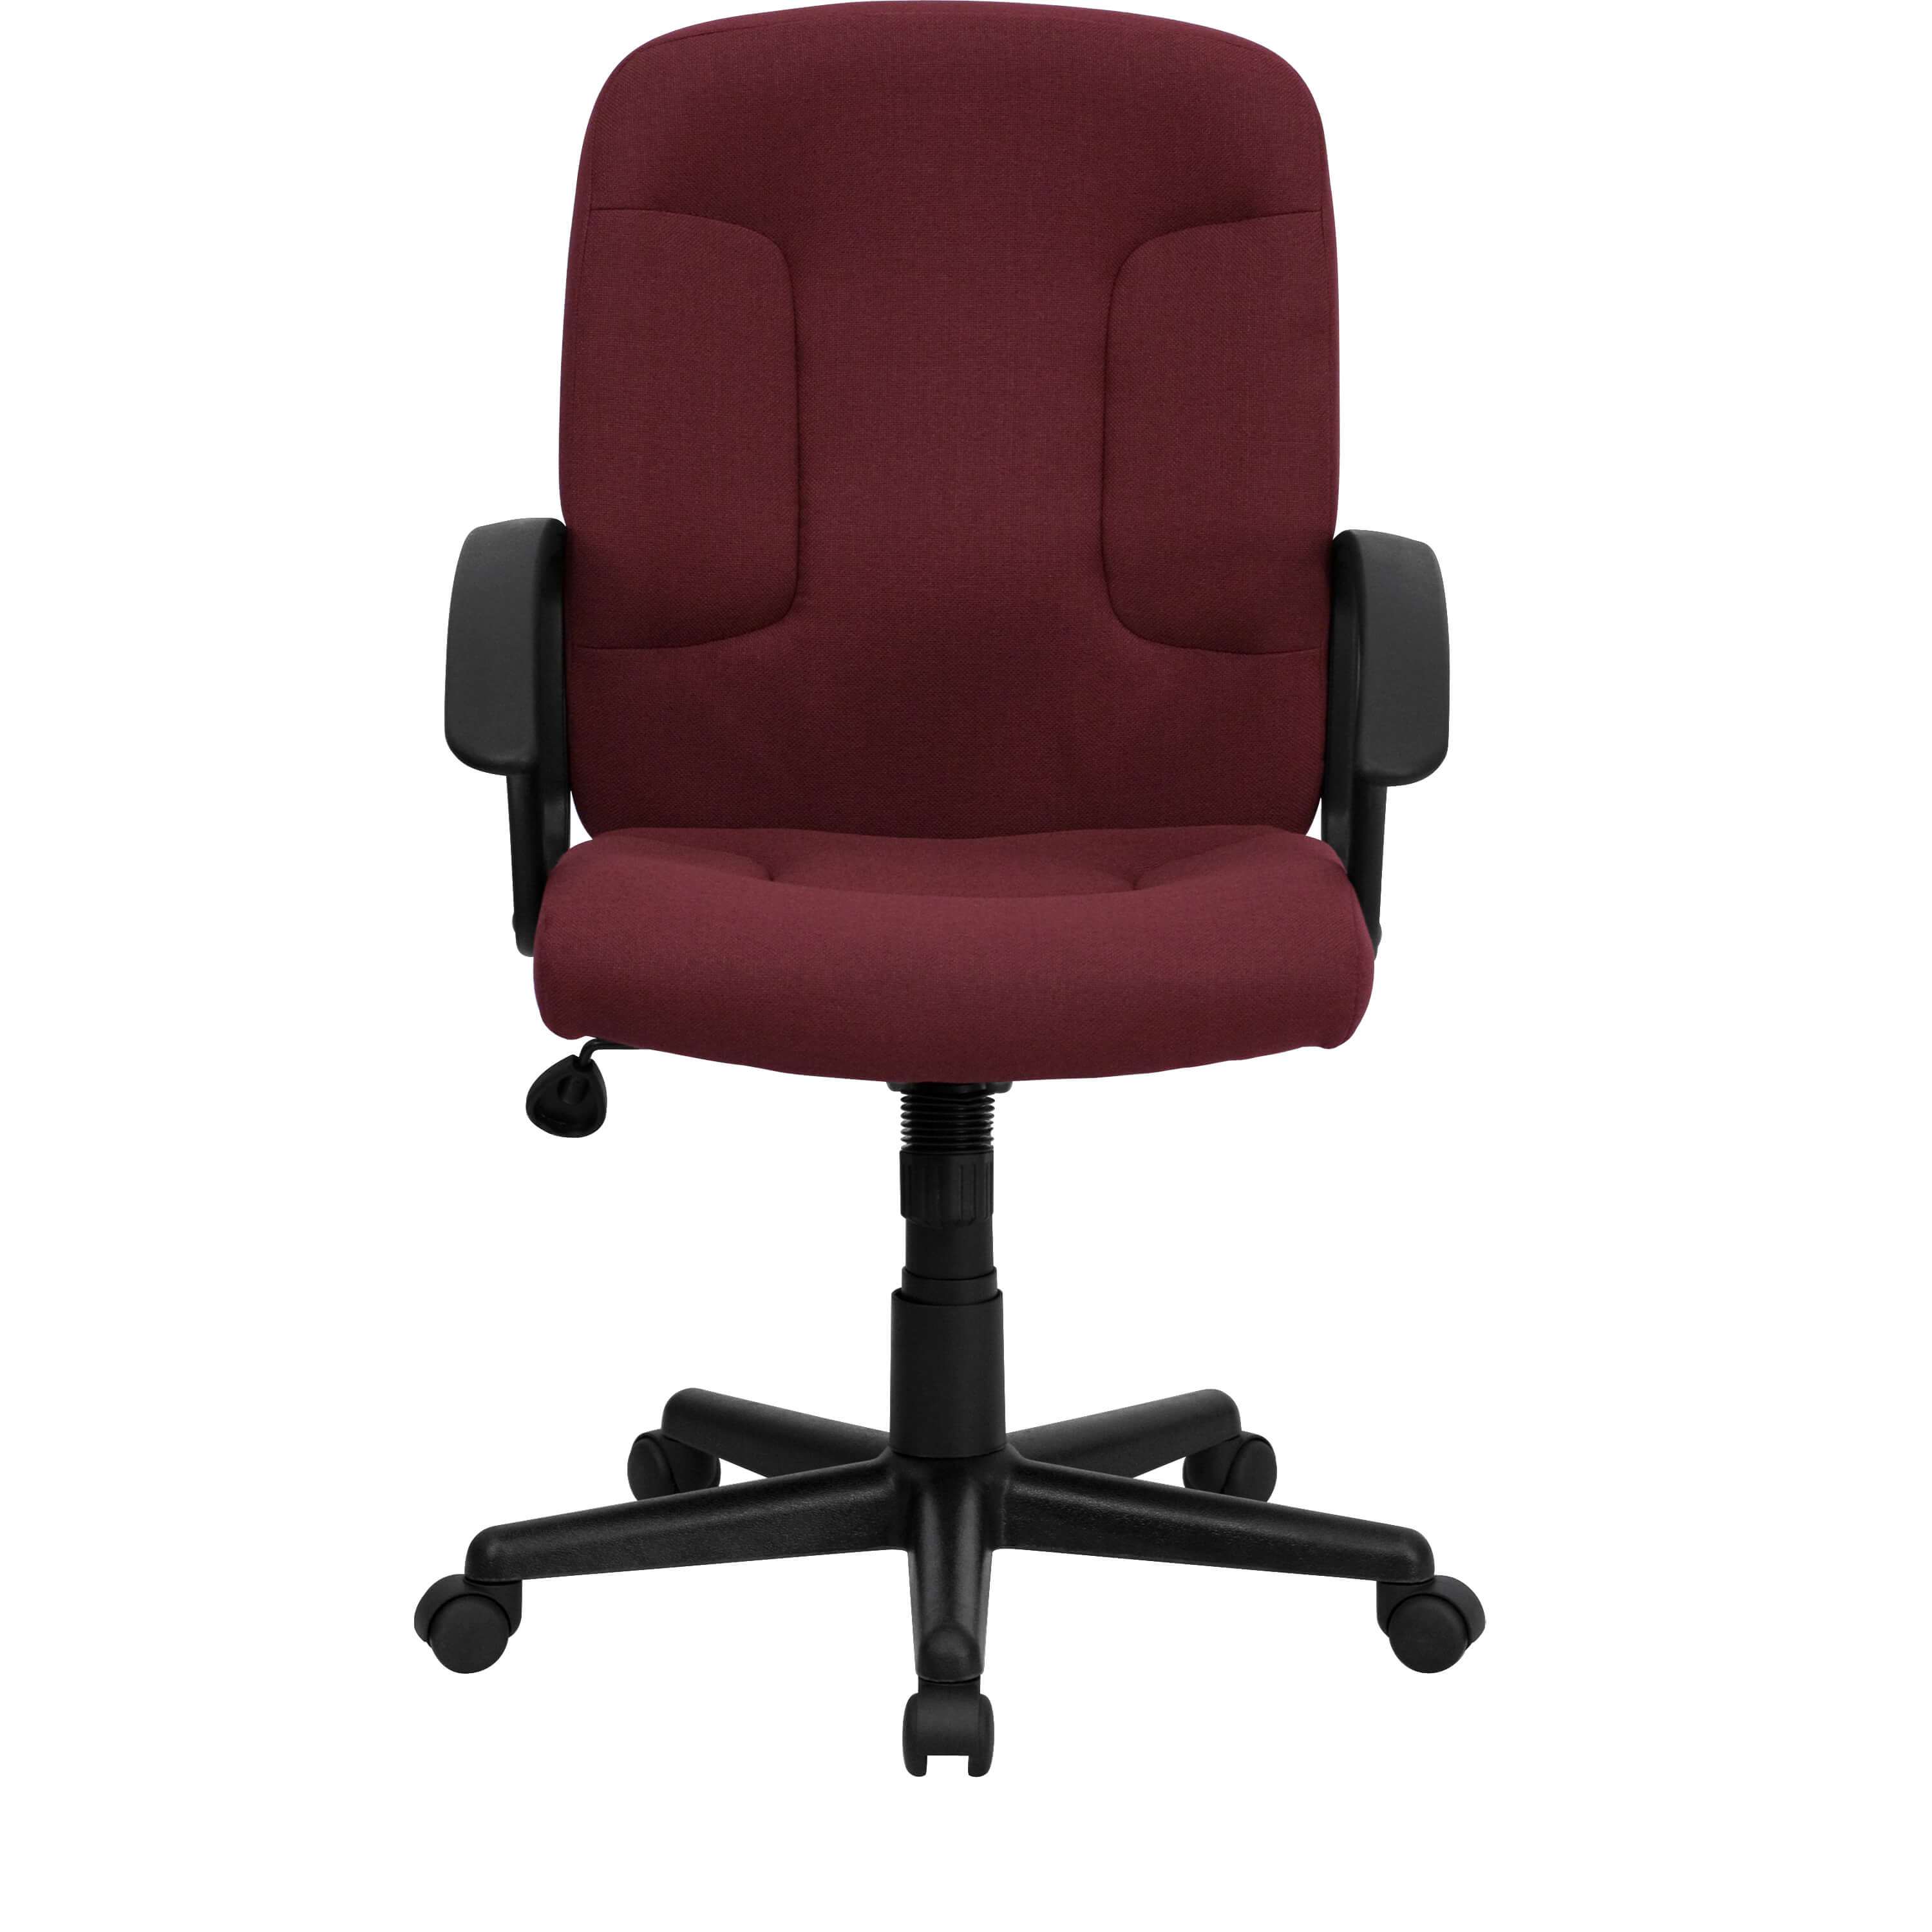 Cool desk chairs CUB GO ST 6 BY GG FLA